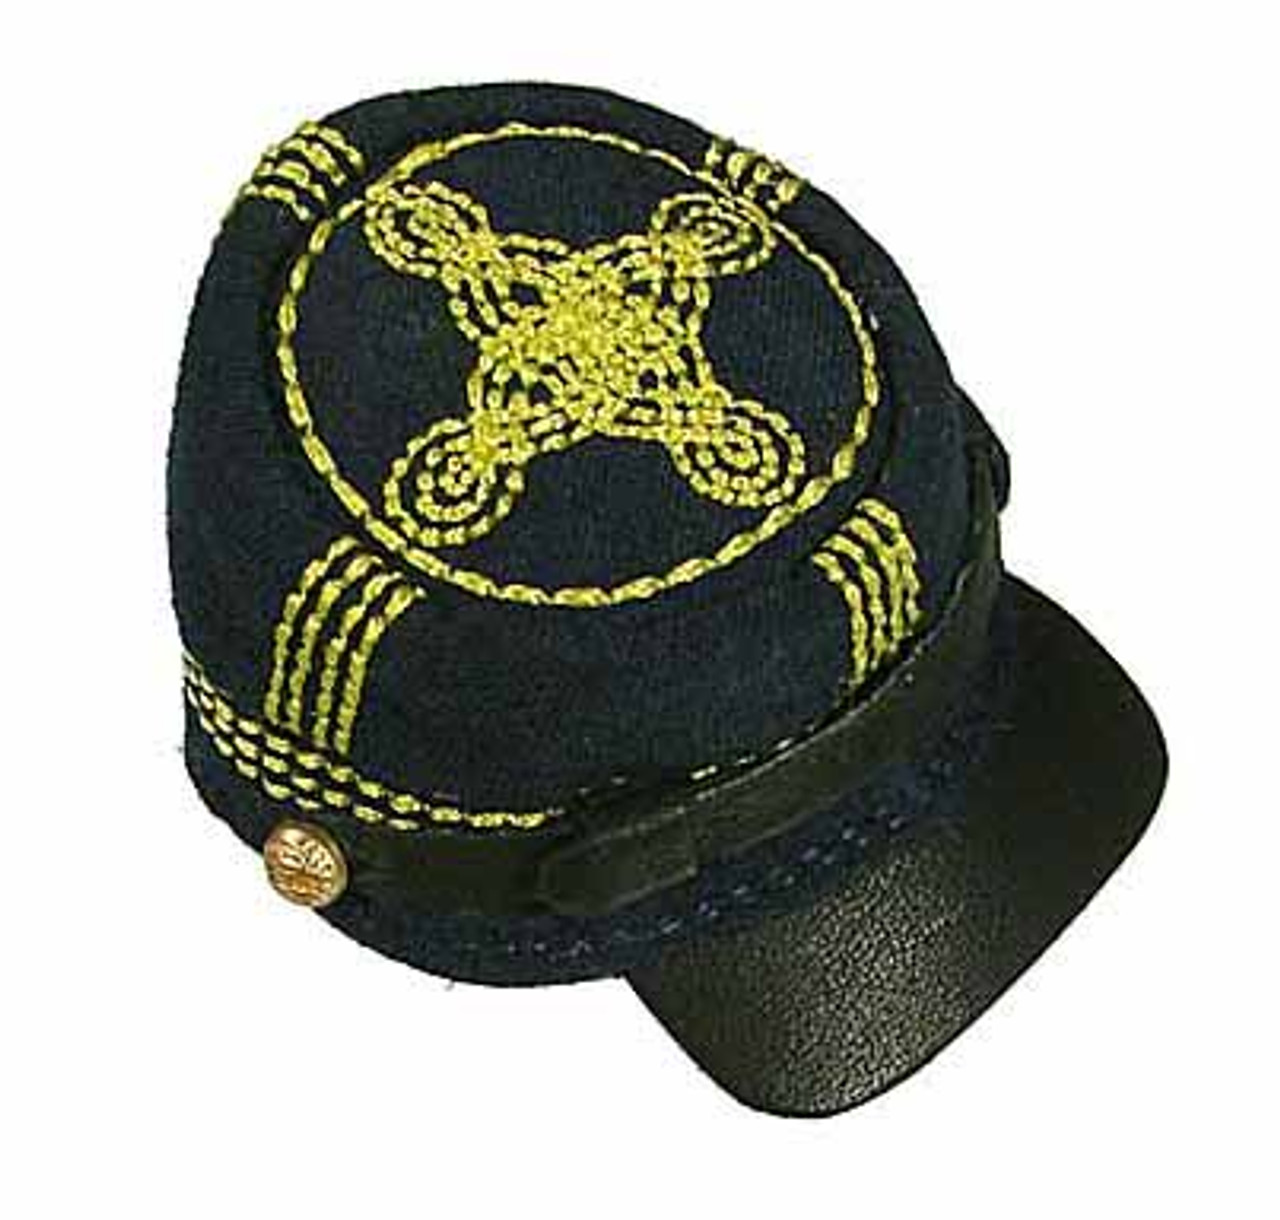 1/6 SCALE ACCESSORY NEW US CIVIL WAR UNION ARMY KEPI HAT FOR 12" ACTION FIGURE 